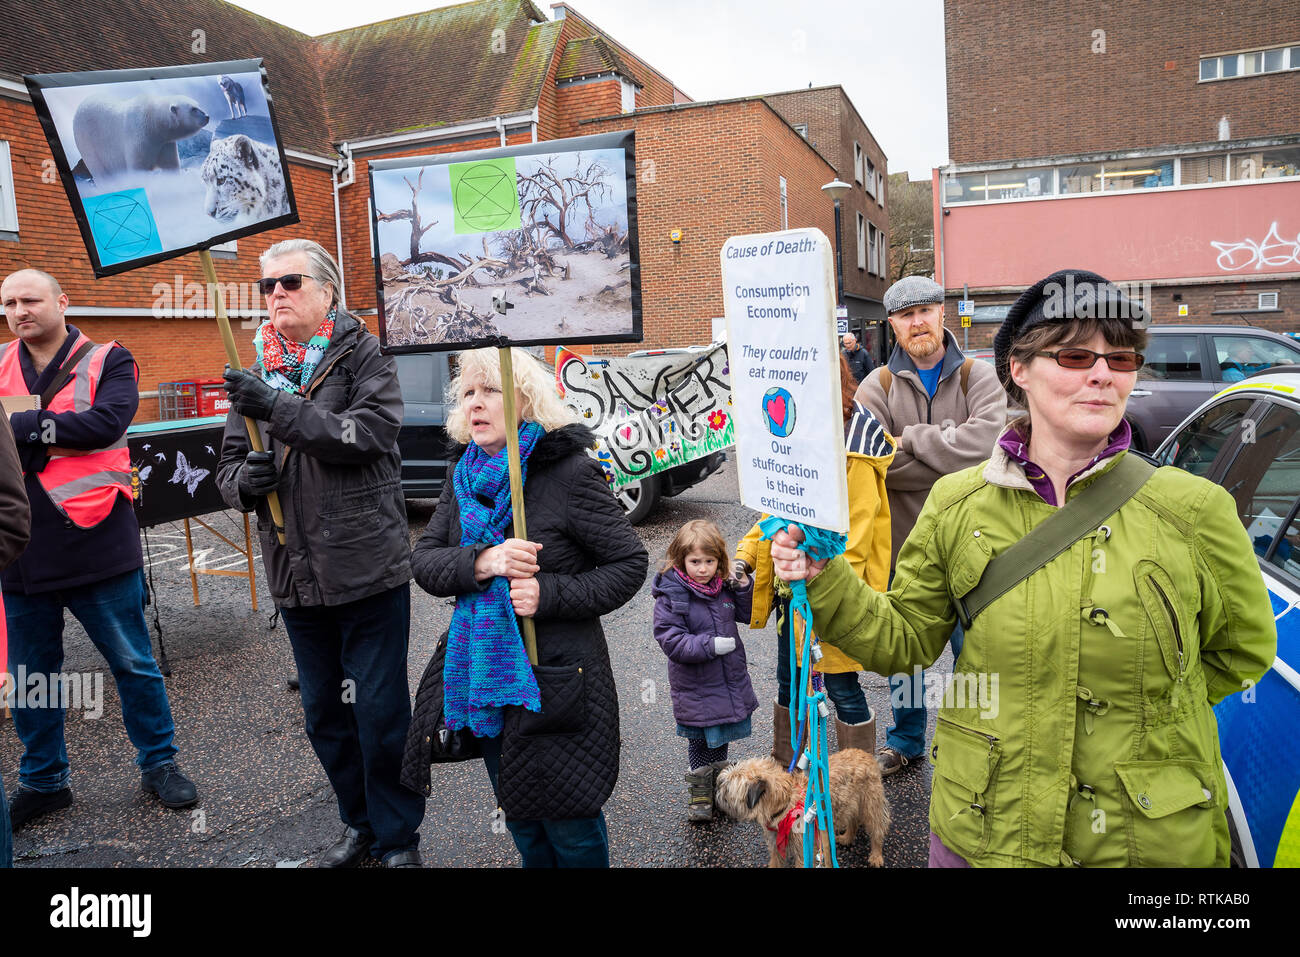 Canterbury, UK. 23rd February 2019. Supporters of the Canterbury Extinction Rebellion Group form up in the City Centre then take part in a symbolic funeral procession representing the death of plants, animals, humans and the planet due to the climate crisis, loss or life. The protest will culminated in a swarming action blocking St. Peters Place. Police were present but didn't interfere, there were no arrests. Credit: Stephen Bell/Alamy Live News Credit: Stephen Bell/Alamy Live News Stock Photo